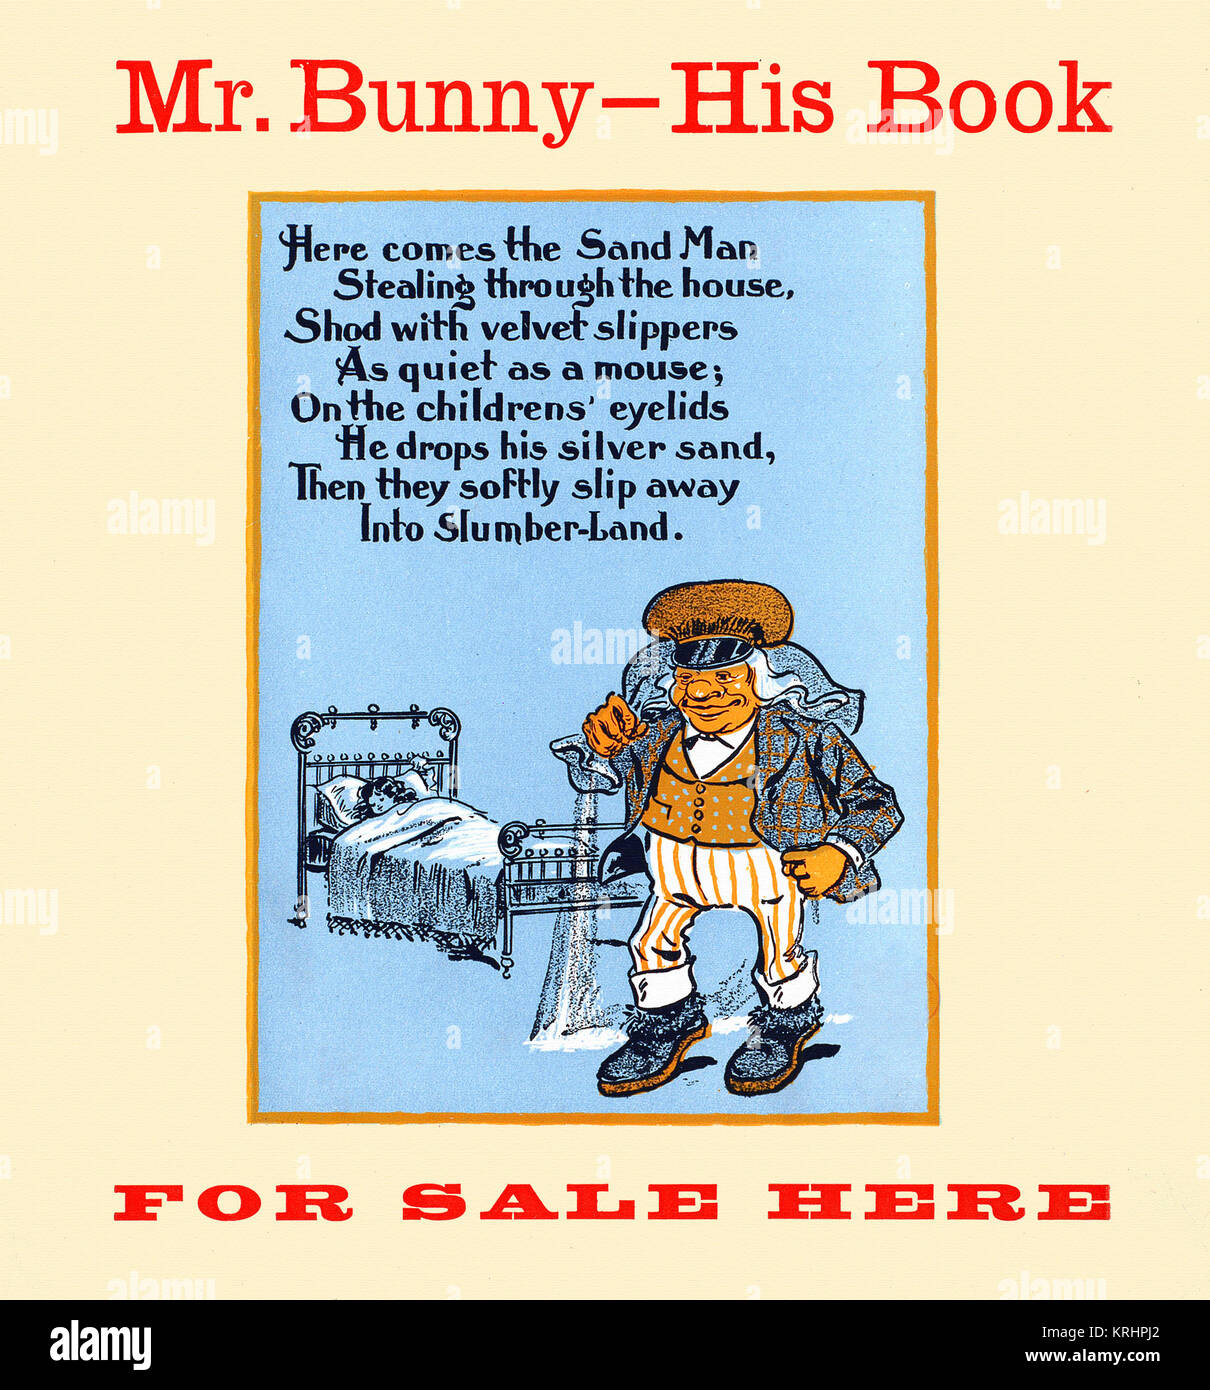 Mr. Bunny - his book, for sale here Stock Photo